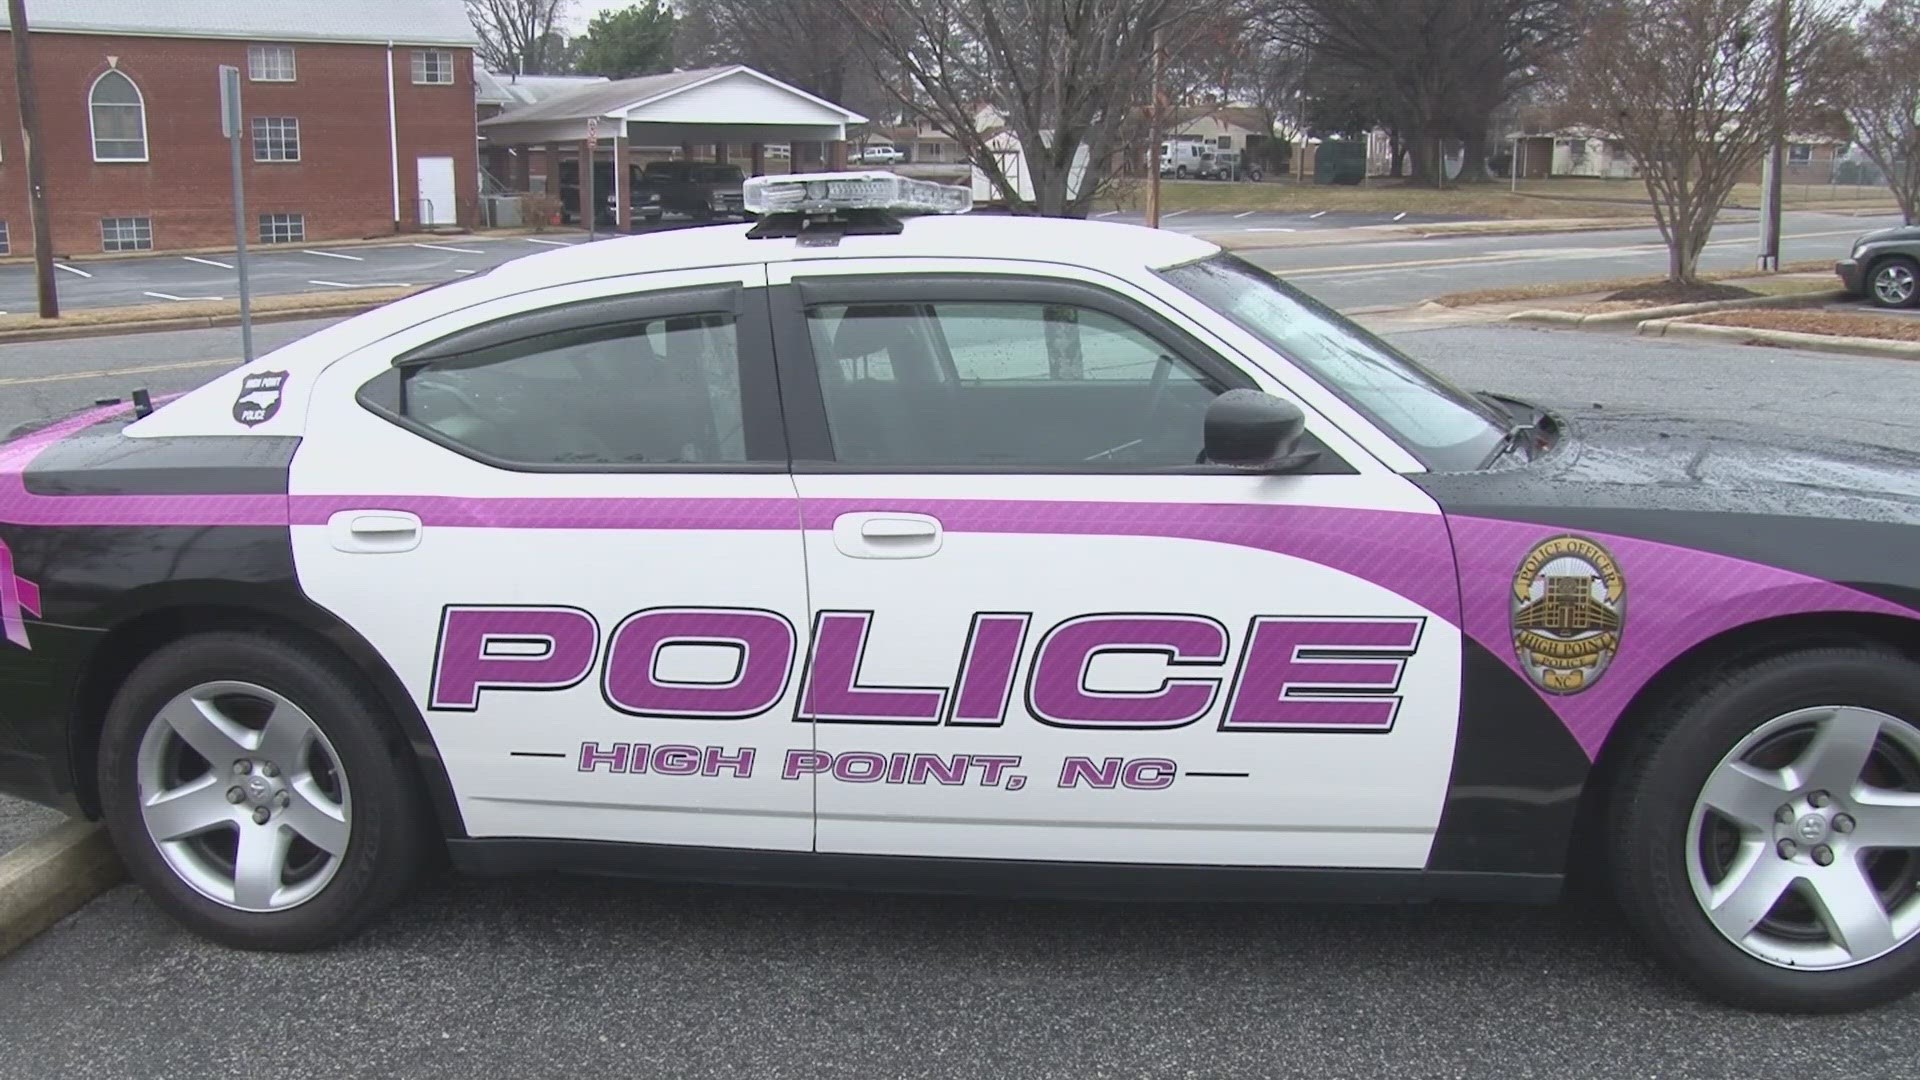 On January 3, 2017, The High Point Police Department unveiled its pink patrol car supporting cancer-impacted employees.